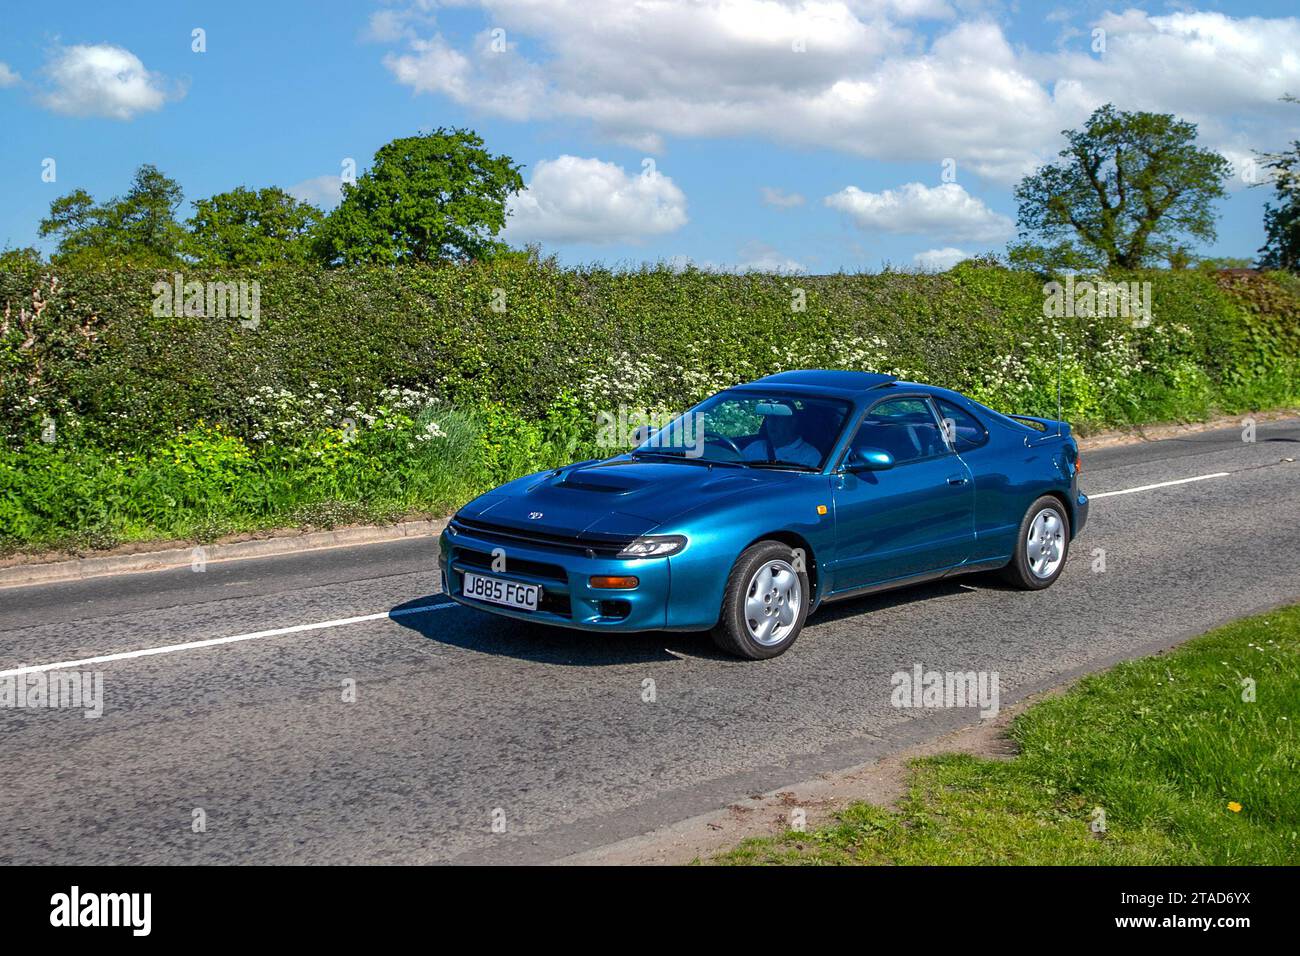 1992 90s nineties Toyota Celica T-Bar GT4 Turquoise 5 speed manual 1998 cc Petrol roadster, 1998cc, 4-cyl turbo, fun sports coupe;  Vintage, restored classic motors, automobile collectors motoring enthusiasts, historic veteran cars travelling in Cheshire, UK Stock Photo